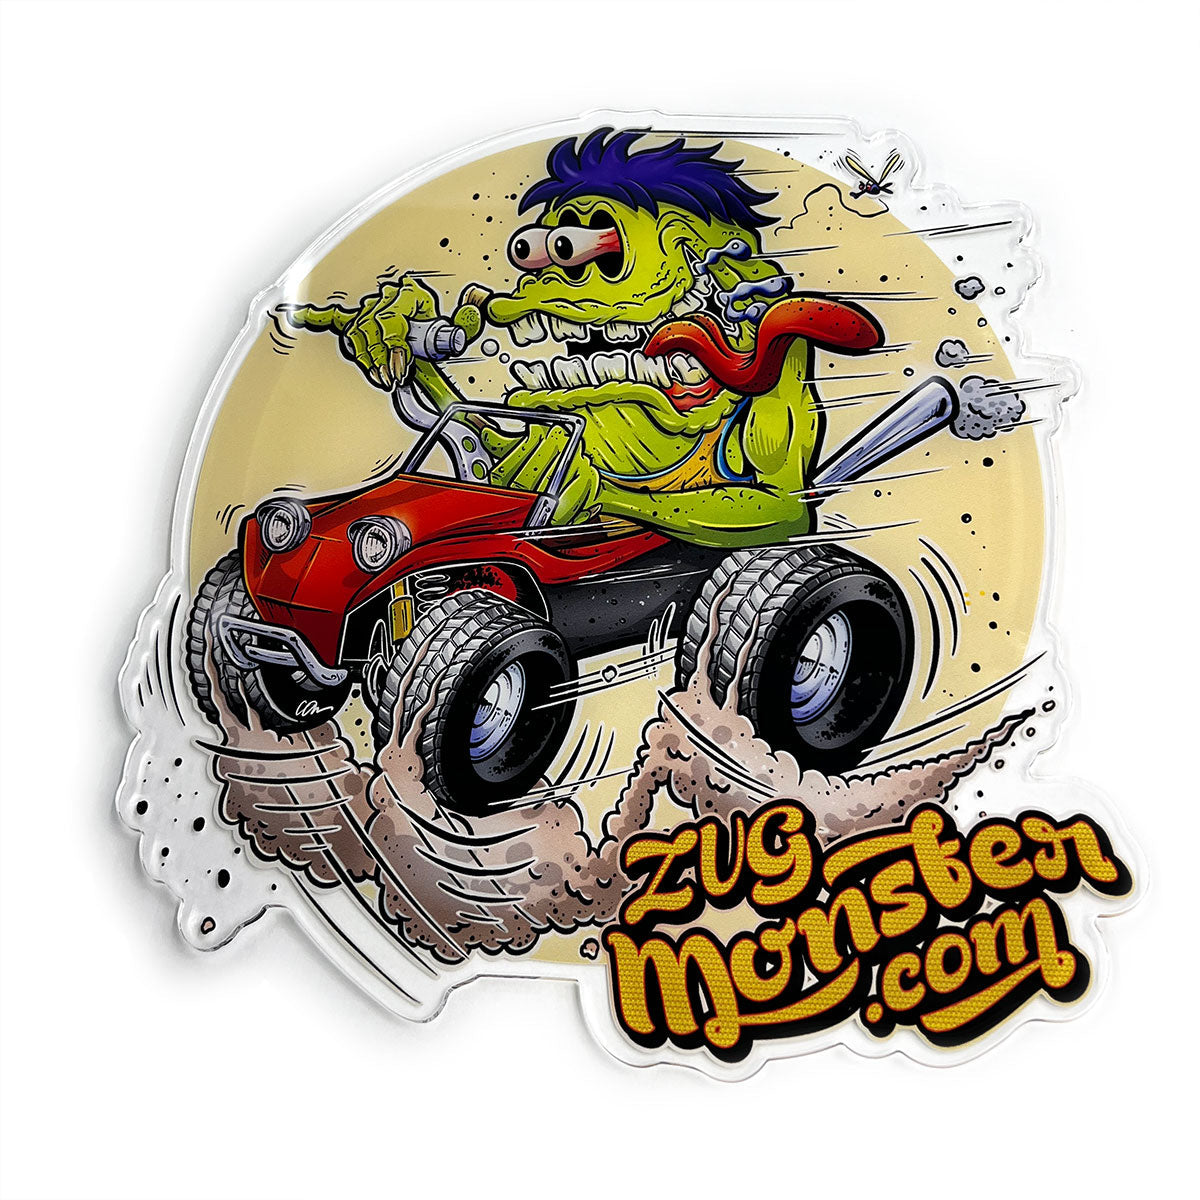 ZUG Monster - Custom stickers, labels, banners, coasters and more! – ZUG  MONSTER